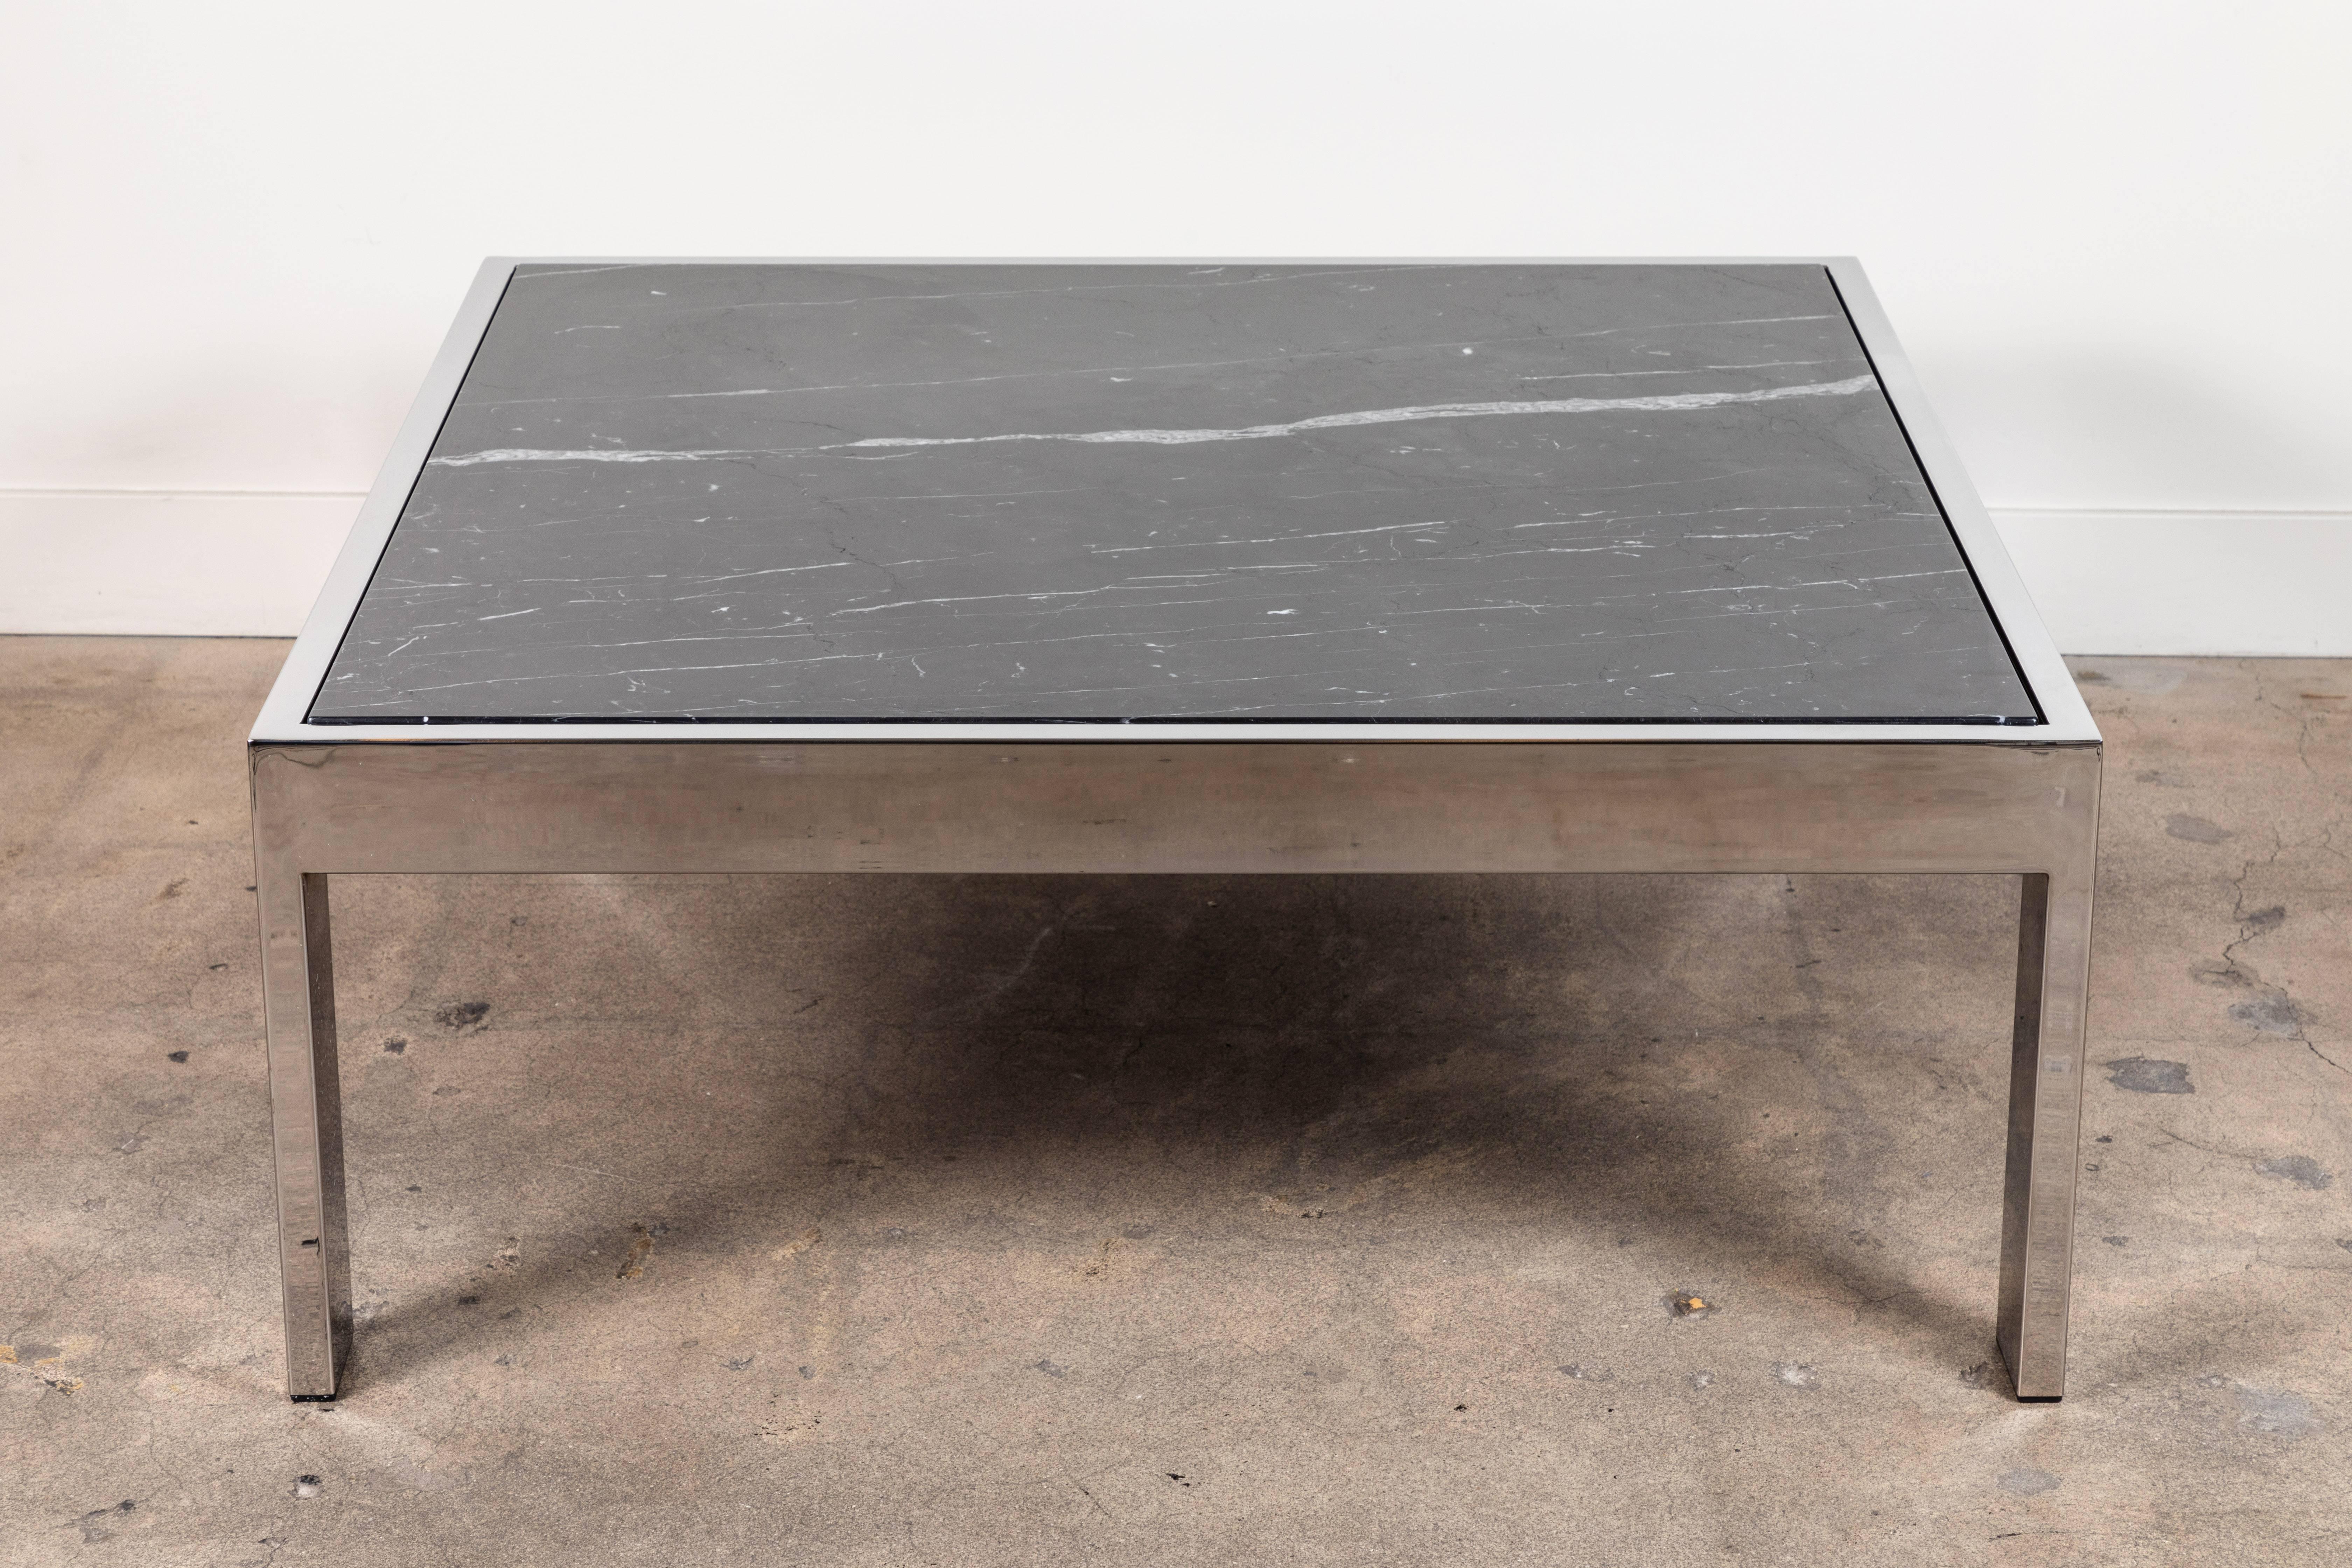 Pace coffee table by Lawson-Fenning in chrome and Negra marquina.